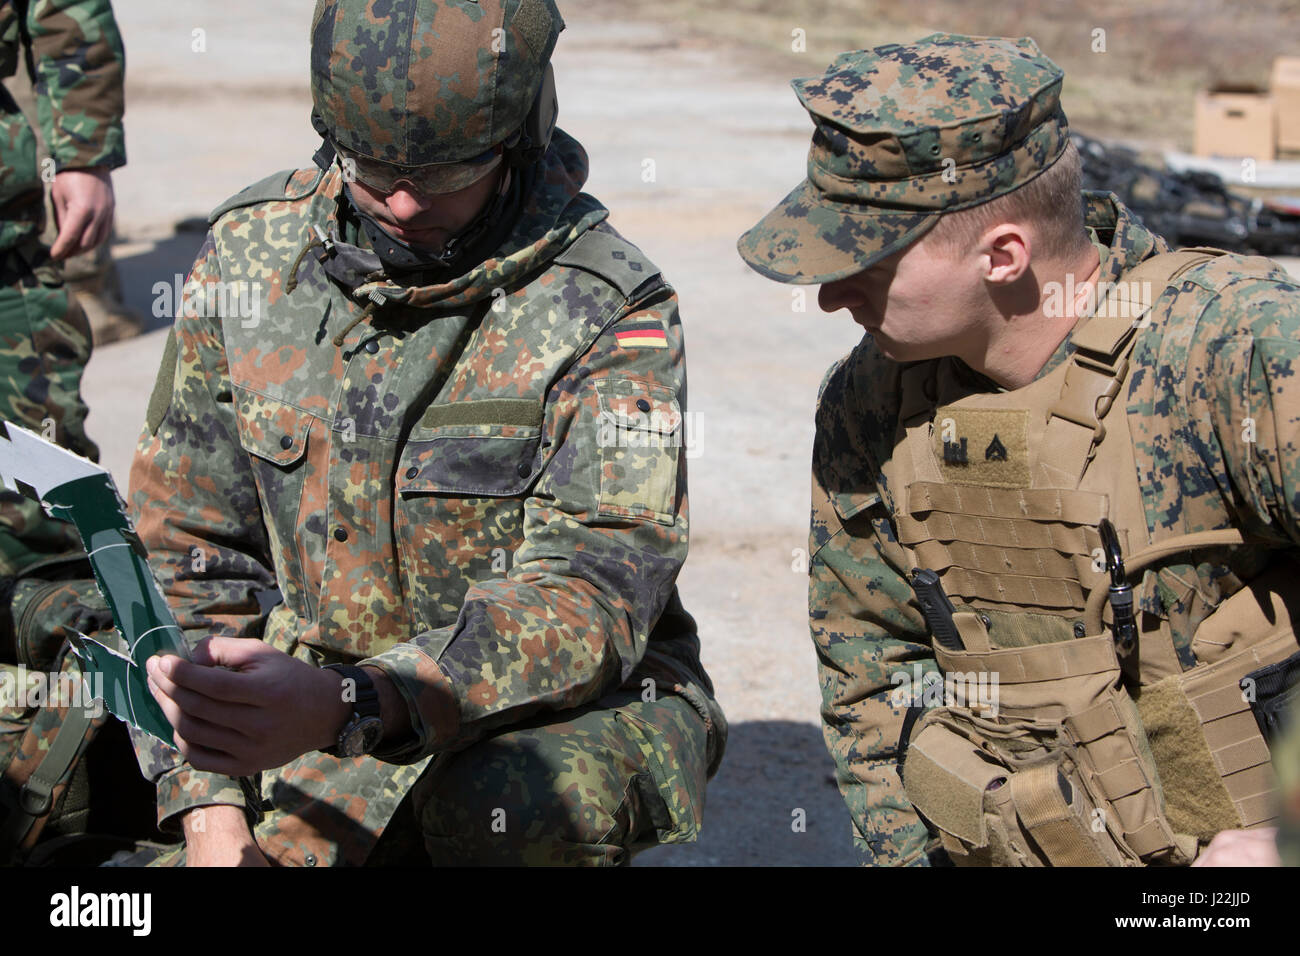 A U.S. Marine with Black Sea Rotational Force 17.1 and a German soldier exchange charge patterns used in everyday practice while participating in breach training during Exercise Summer Shield aboard Adazi Military Base, Latvia, April 20, 2017. Exercise Summer Shield is a multinational NATO exercise. (U.S. Marine Corps photo by Sgt. Patricia A. Morris) Stock Photo